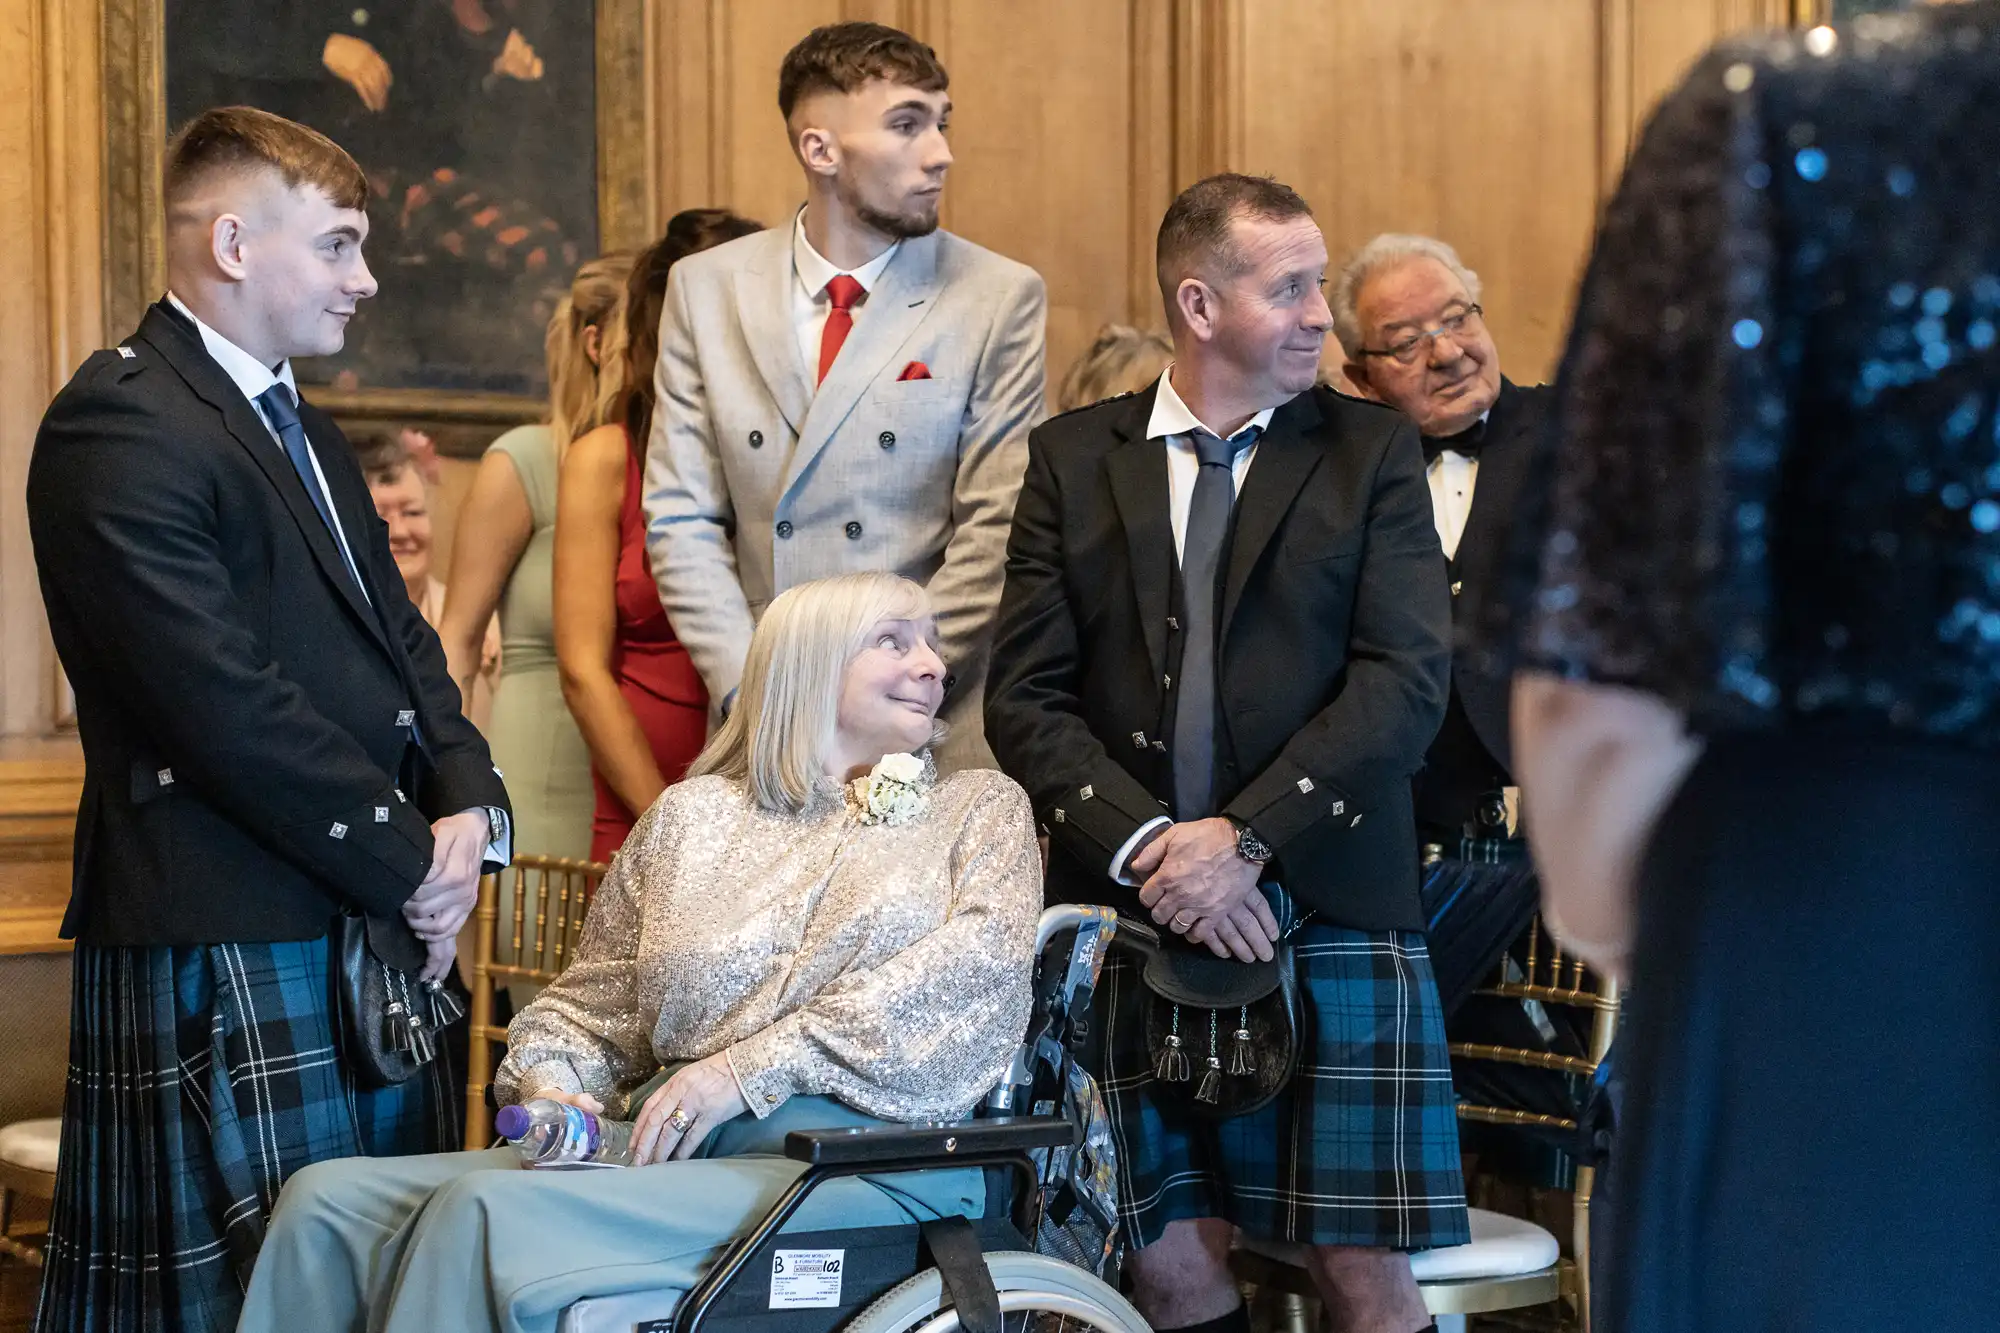 A group of people in a formal setting. A woman in a wheelchair is in the center, surrounded by men wearing kilts and jackets. They are engaged in conversation, with others in the background.